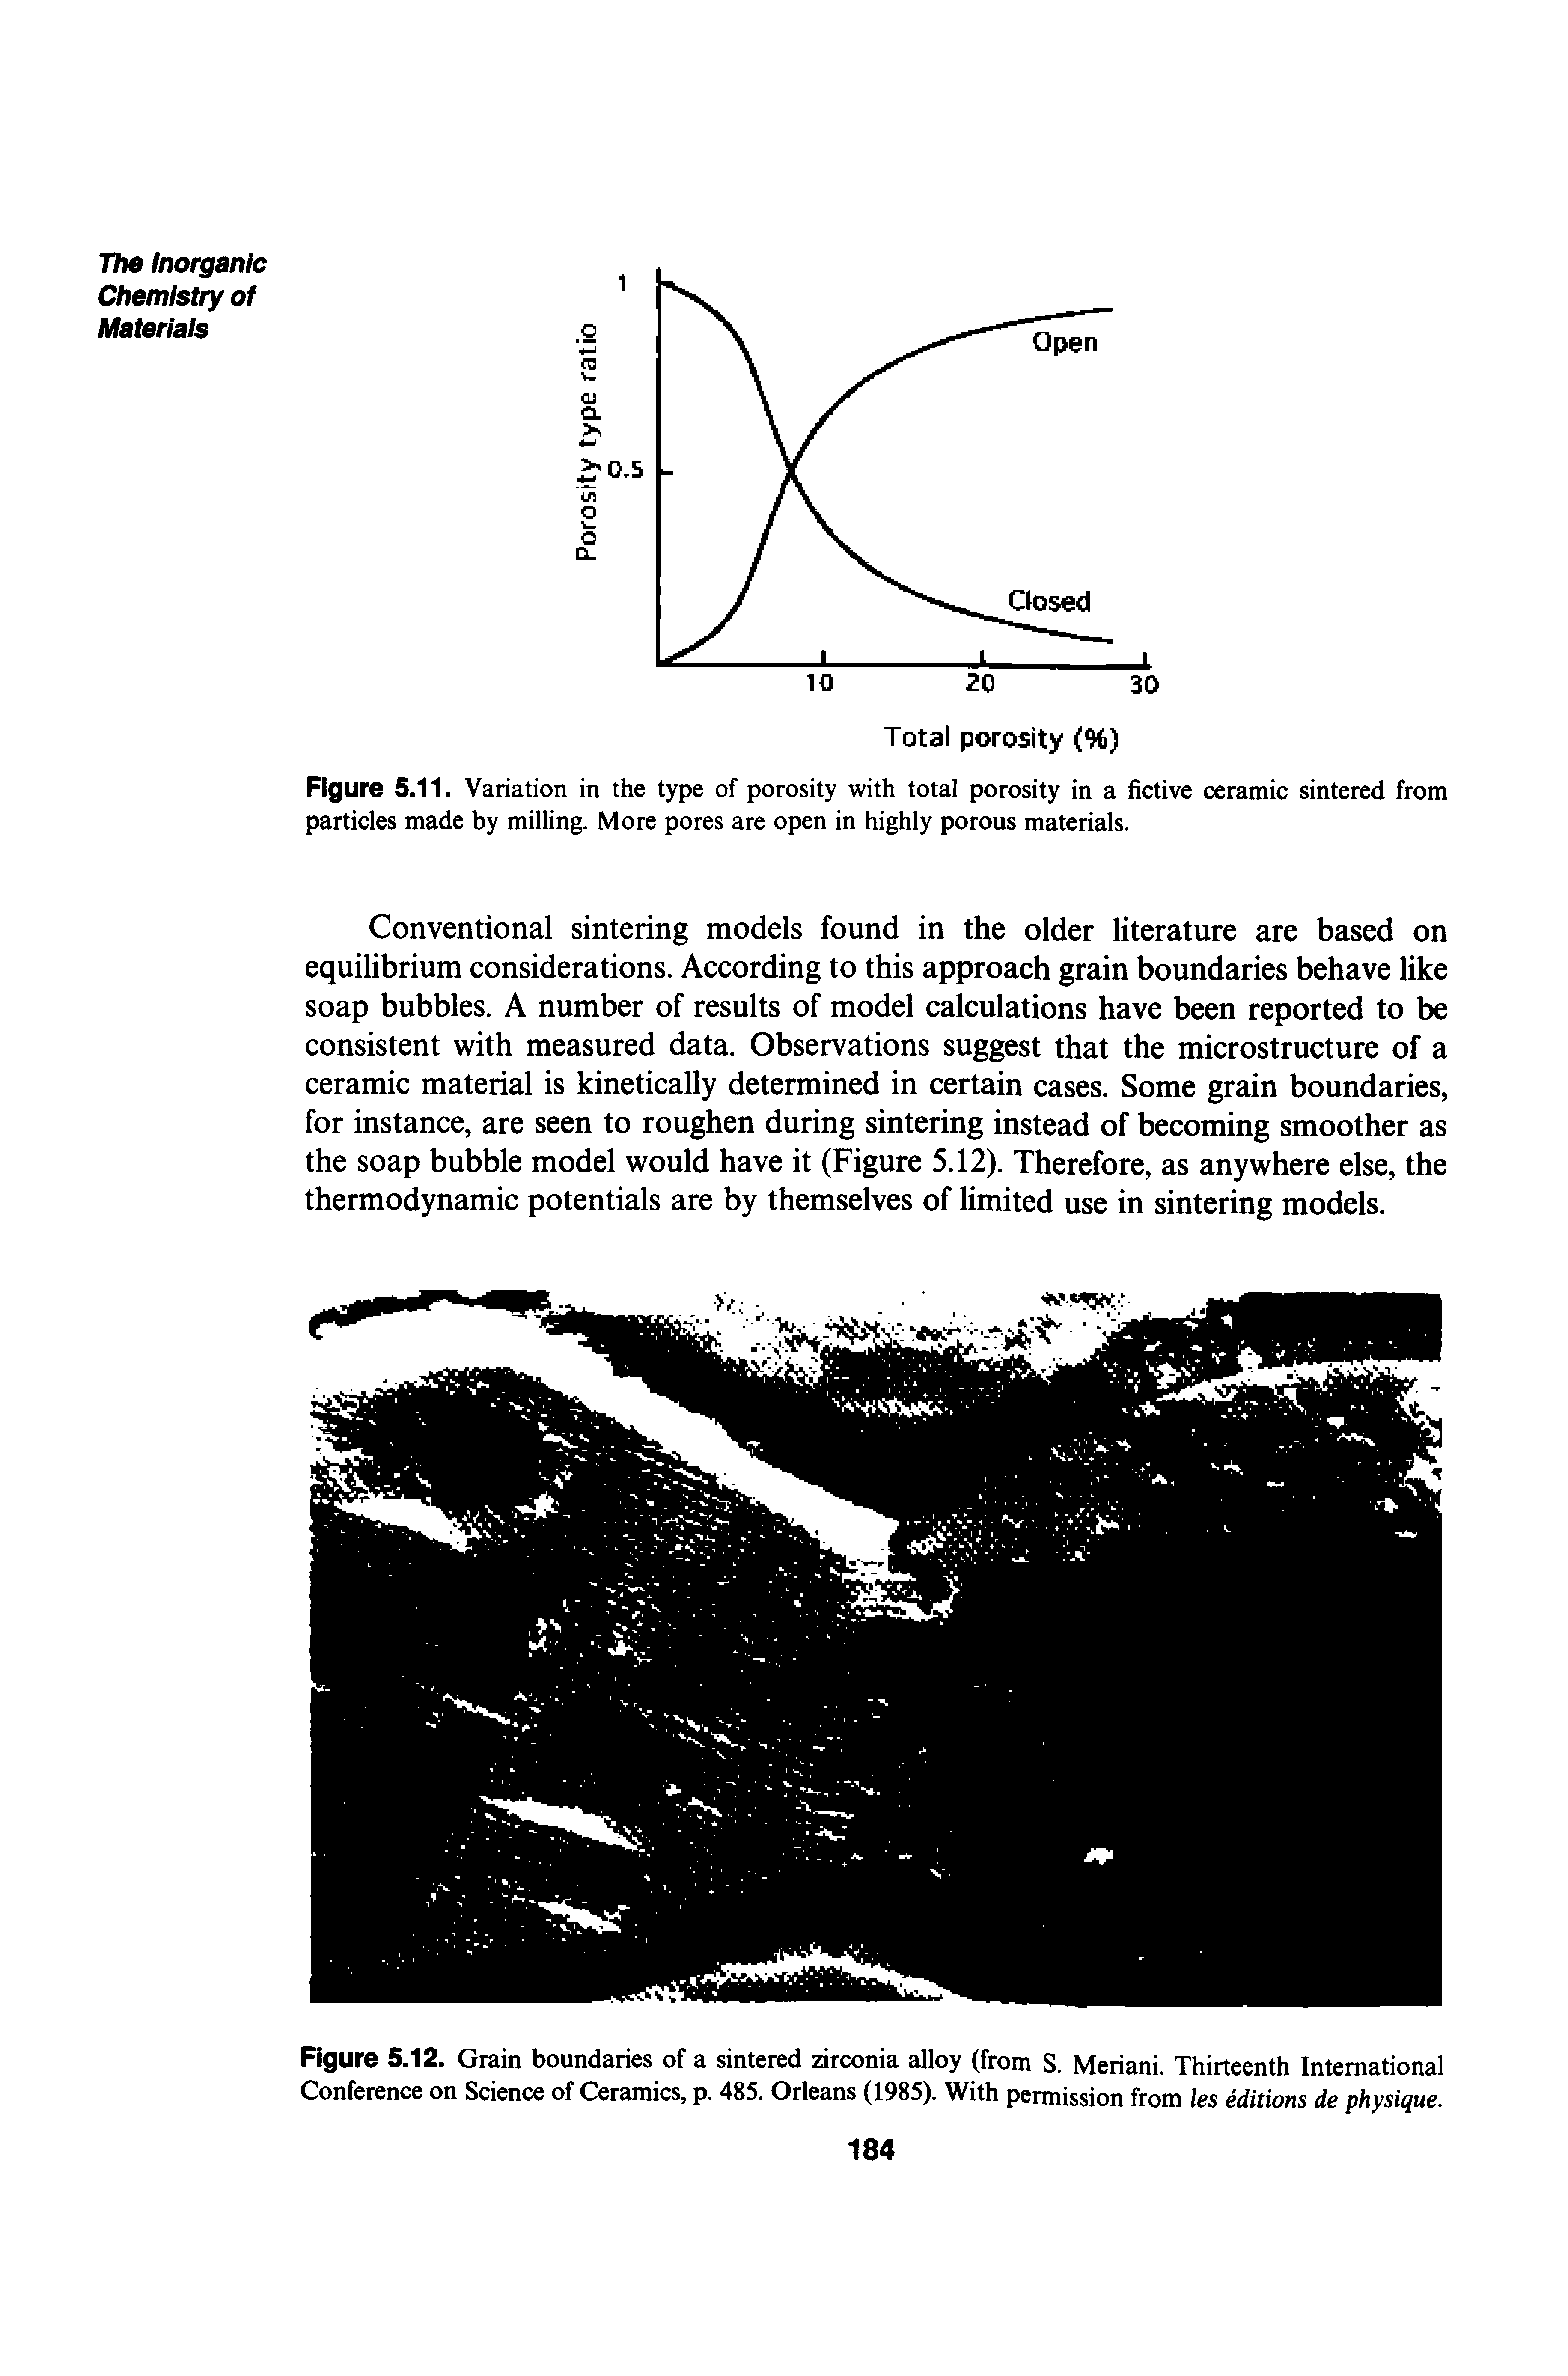 Figure 5.12. Grain boundaries of a sintered zirconia alloy (from S. Meriani. Thirteenth International Conference on Science of Ceramics, p. 485. Orleans (1985). With permission from les editions de physique.